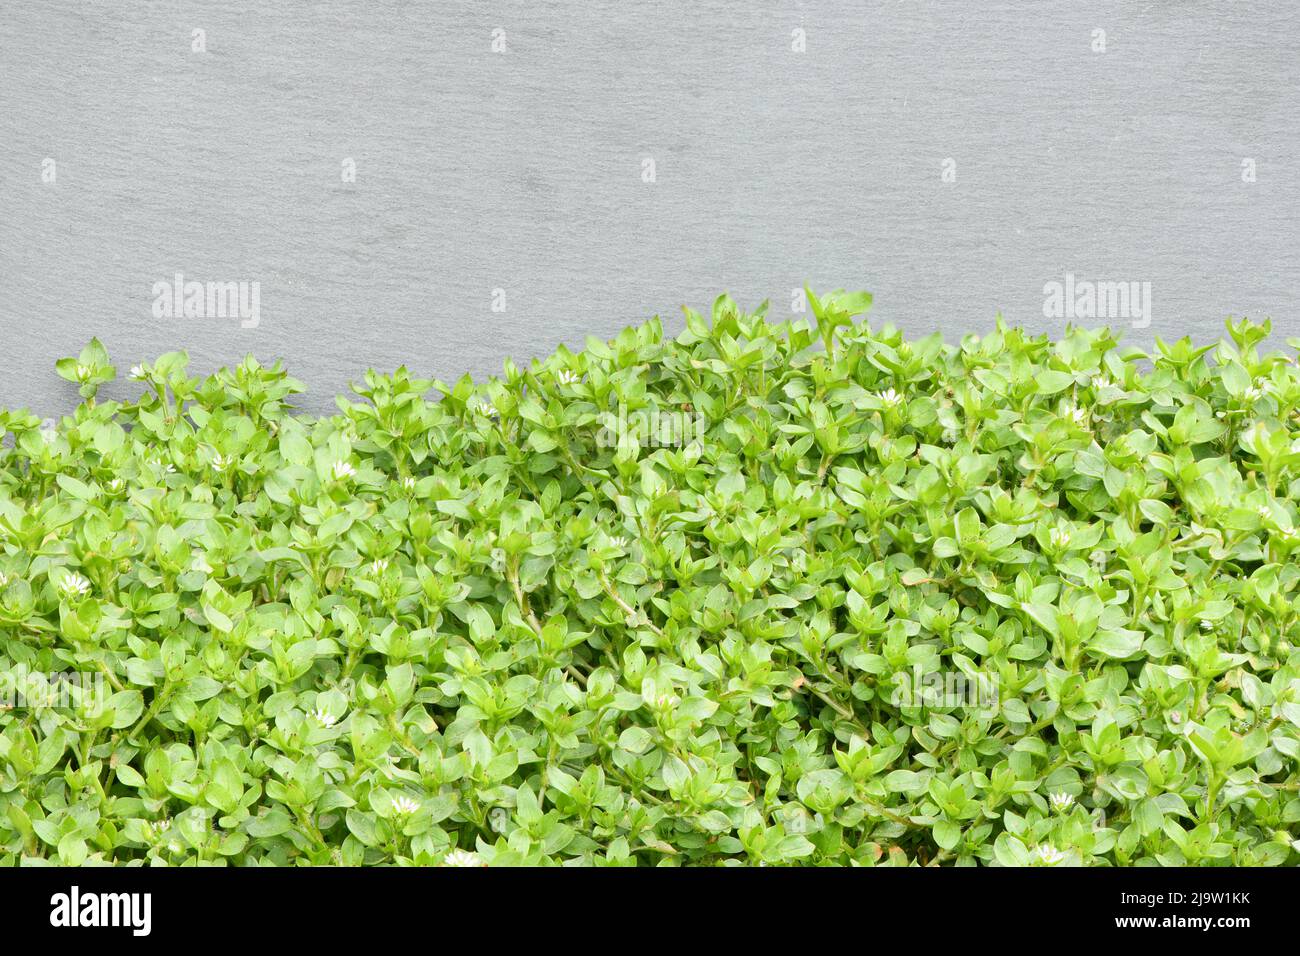 Chickweed ,Stellaria media in the garden. The plants are annual and with weak slender stems, they reach a length up to 40 cm. High resolution photo. F Stock Photo